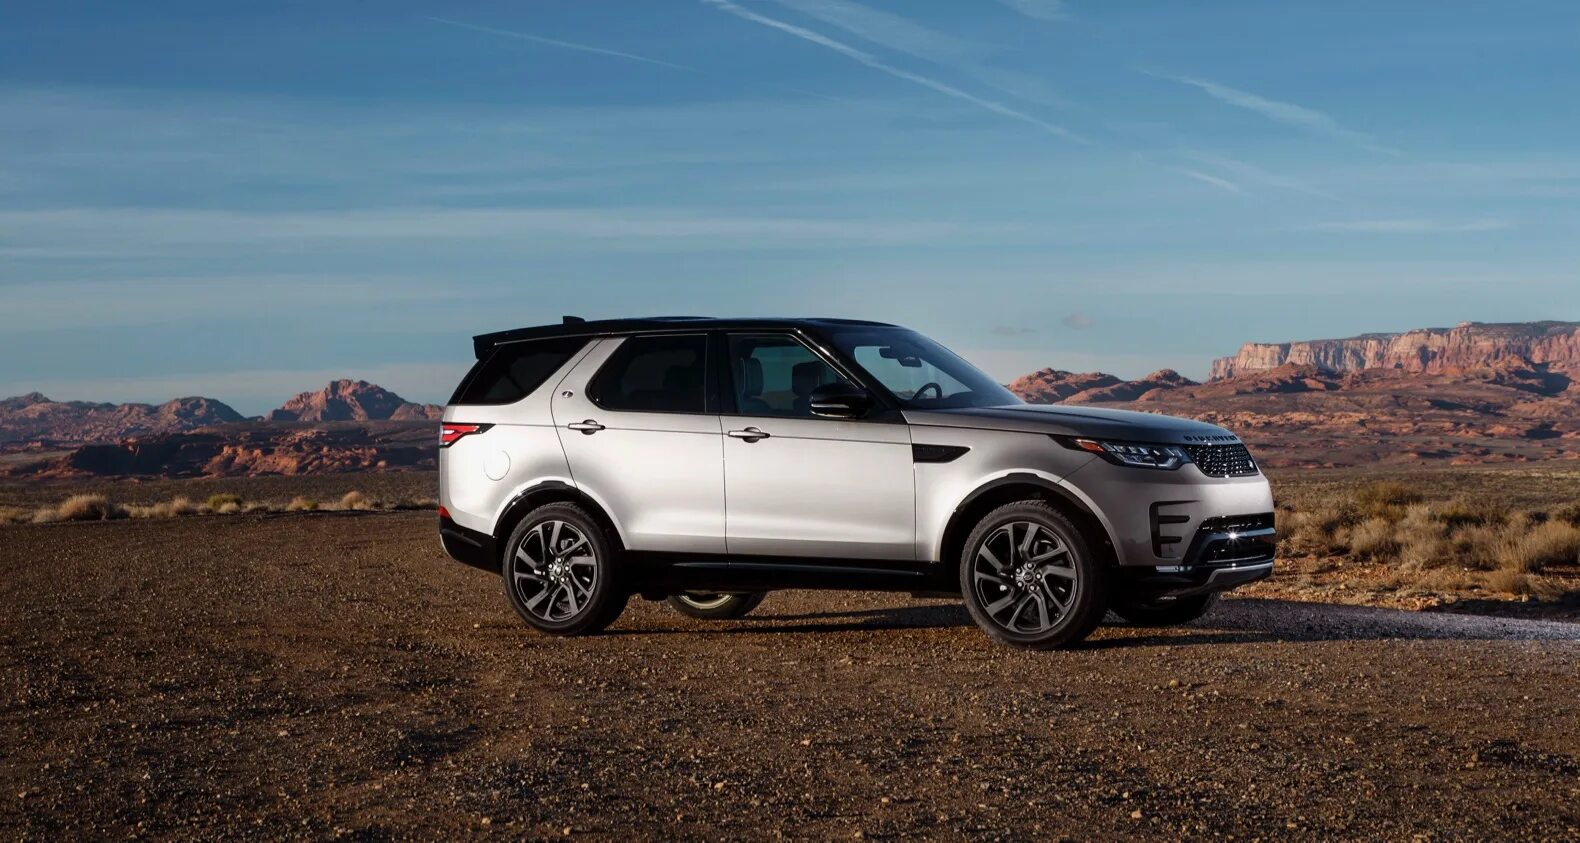 Range Rover Discovery 2023. Land Rover Discovery 2019. Рендж Ровер Дискавери 2019. Лендровер Дискавери 2023 SV. Вине дискавери